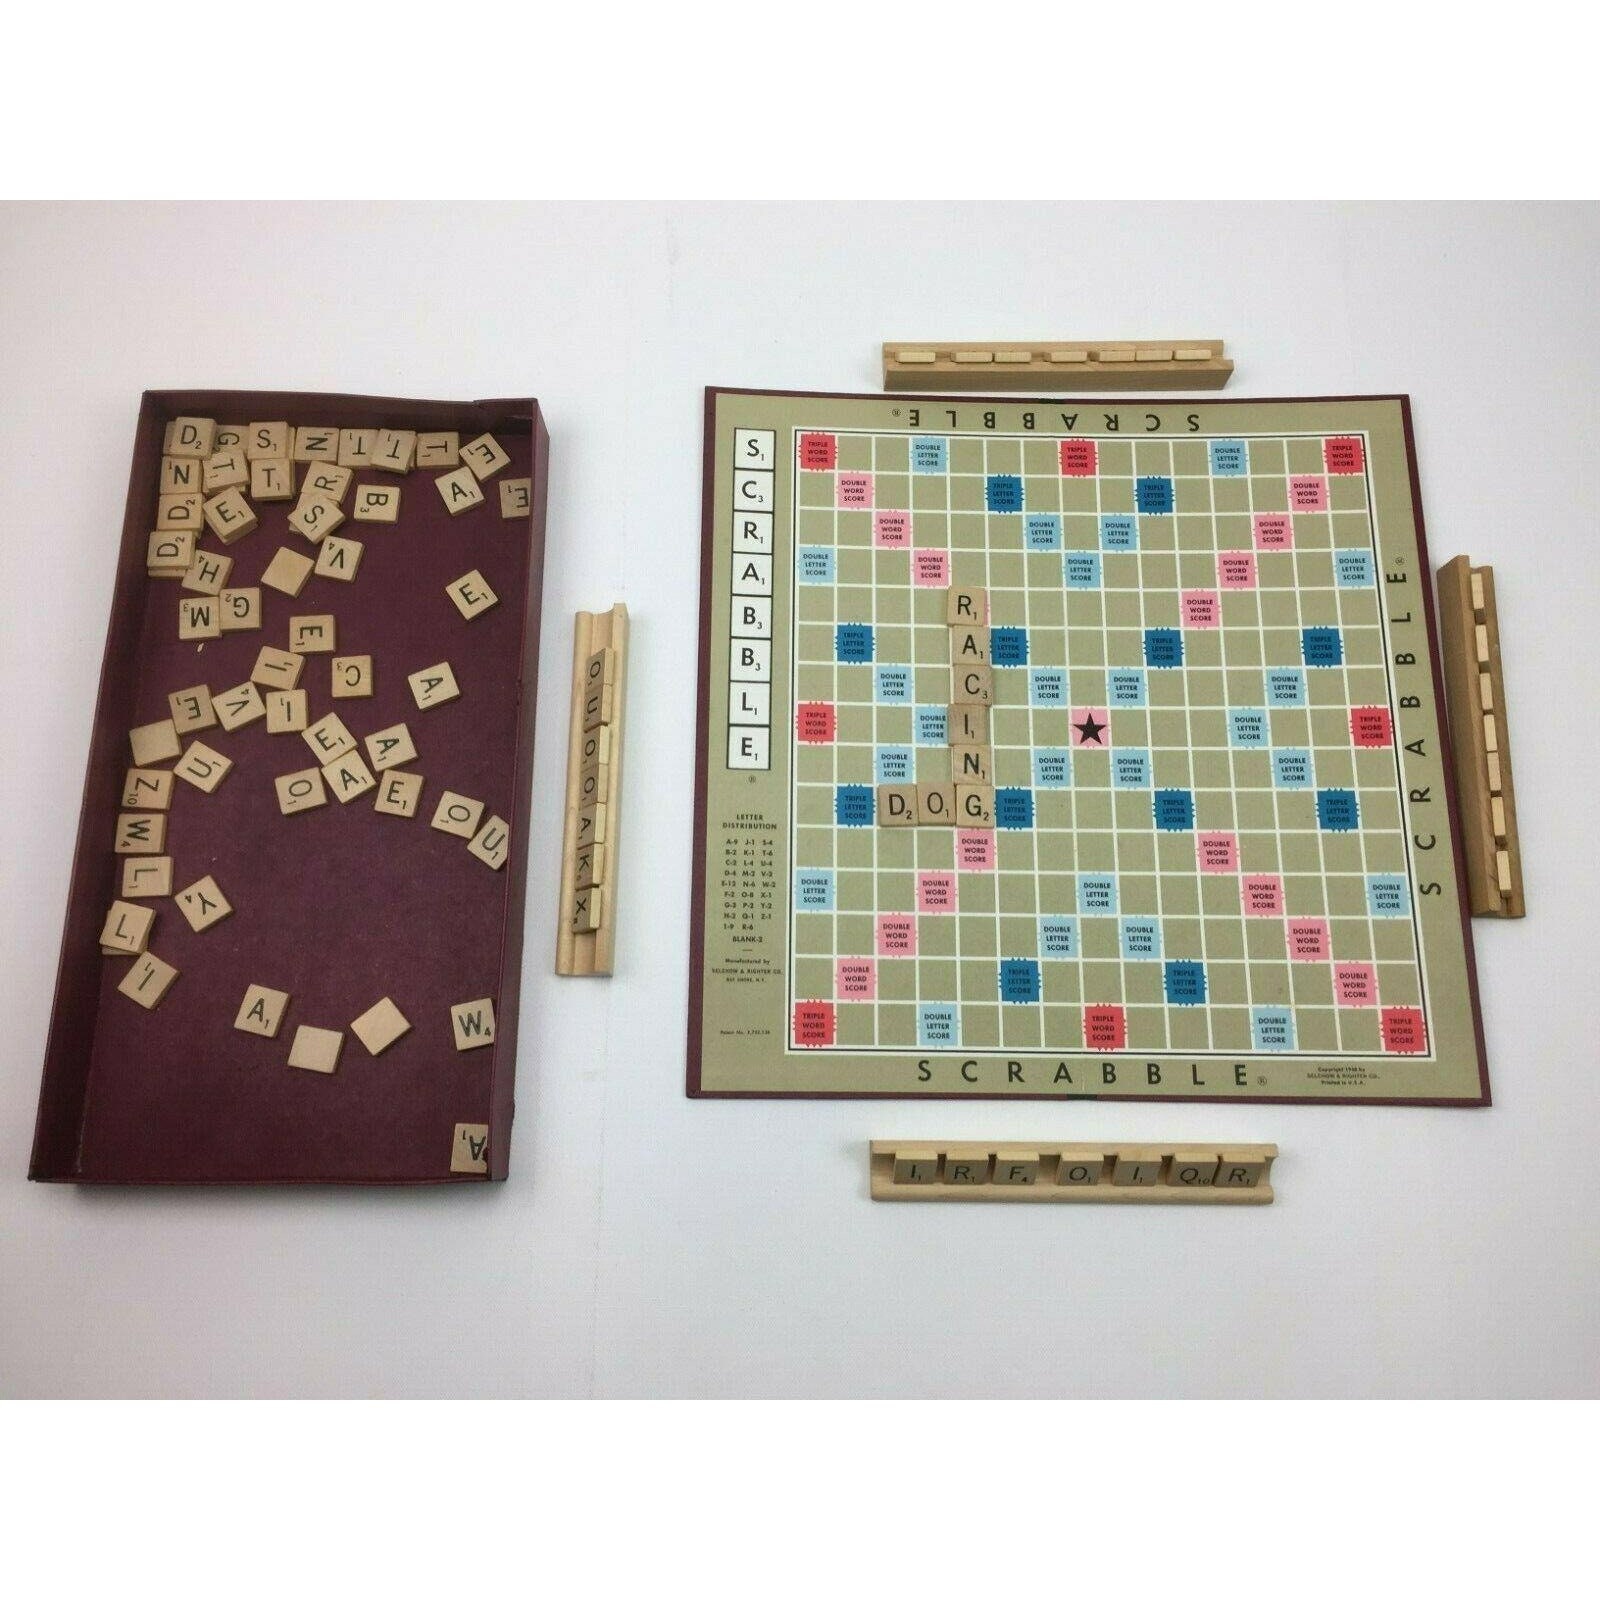 VTG 1953 SCRABBLE CROSSWORD BOARD GAME SELCHOW & RIGHTER replacement tiles 